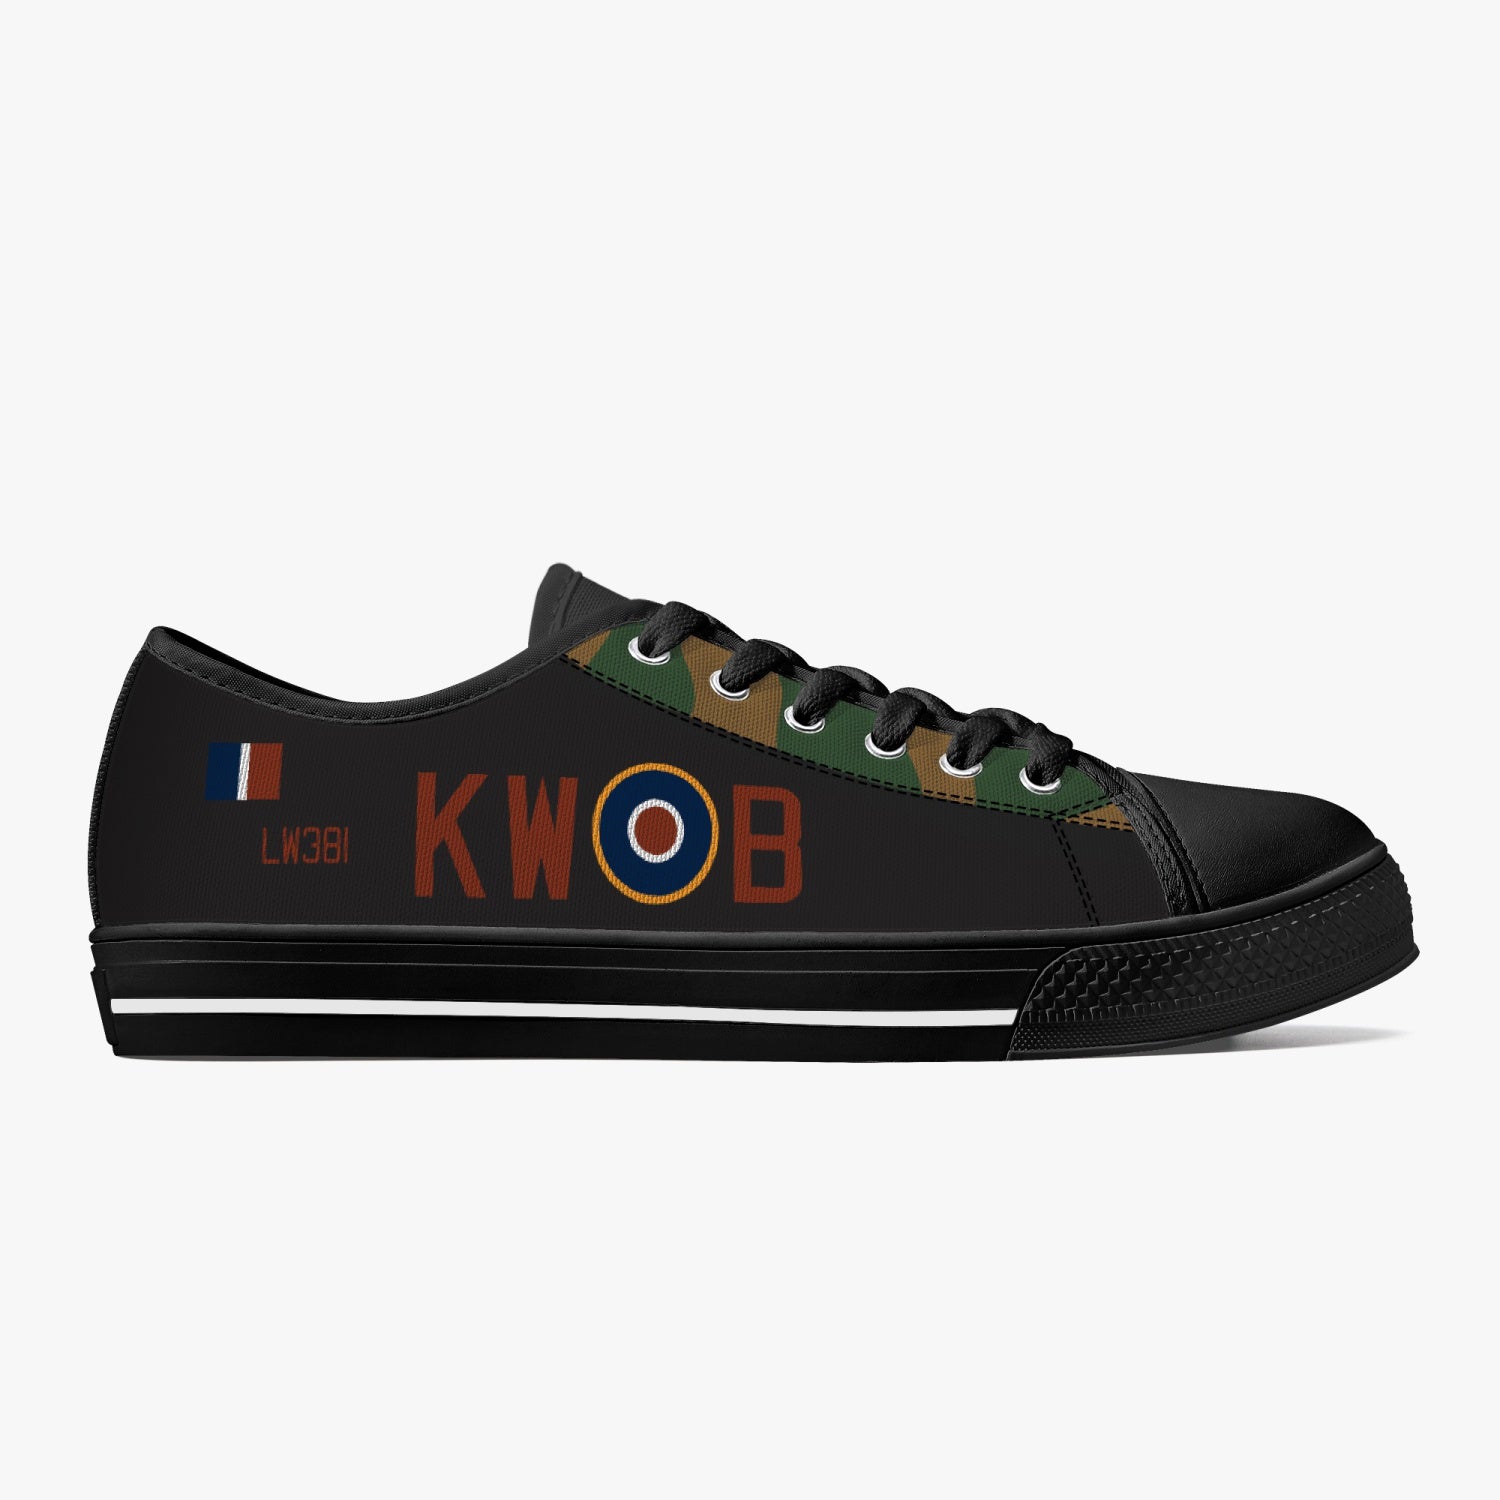 Bomber Command "KW-B" (LW381) Low-Top Canvas Shoes - I Love a Hangar